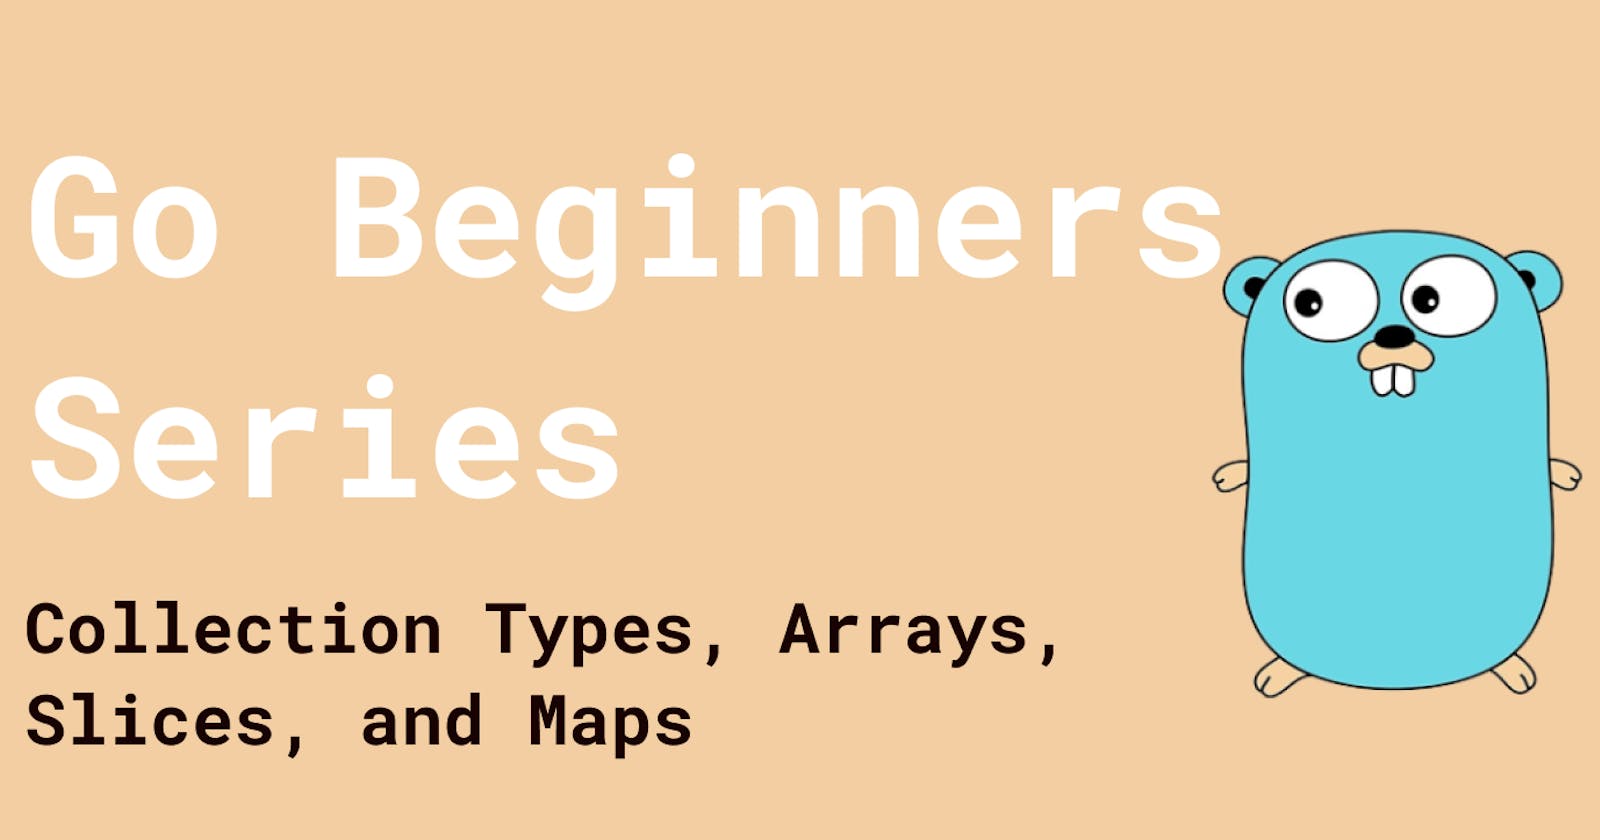 Go Beginners Series: Collection Types, Arrays, Slices, and Maps